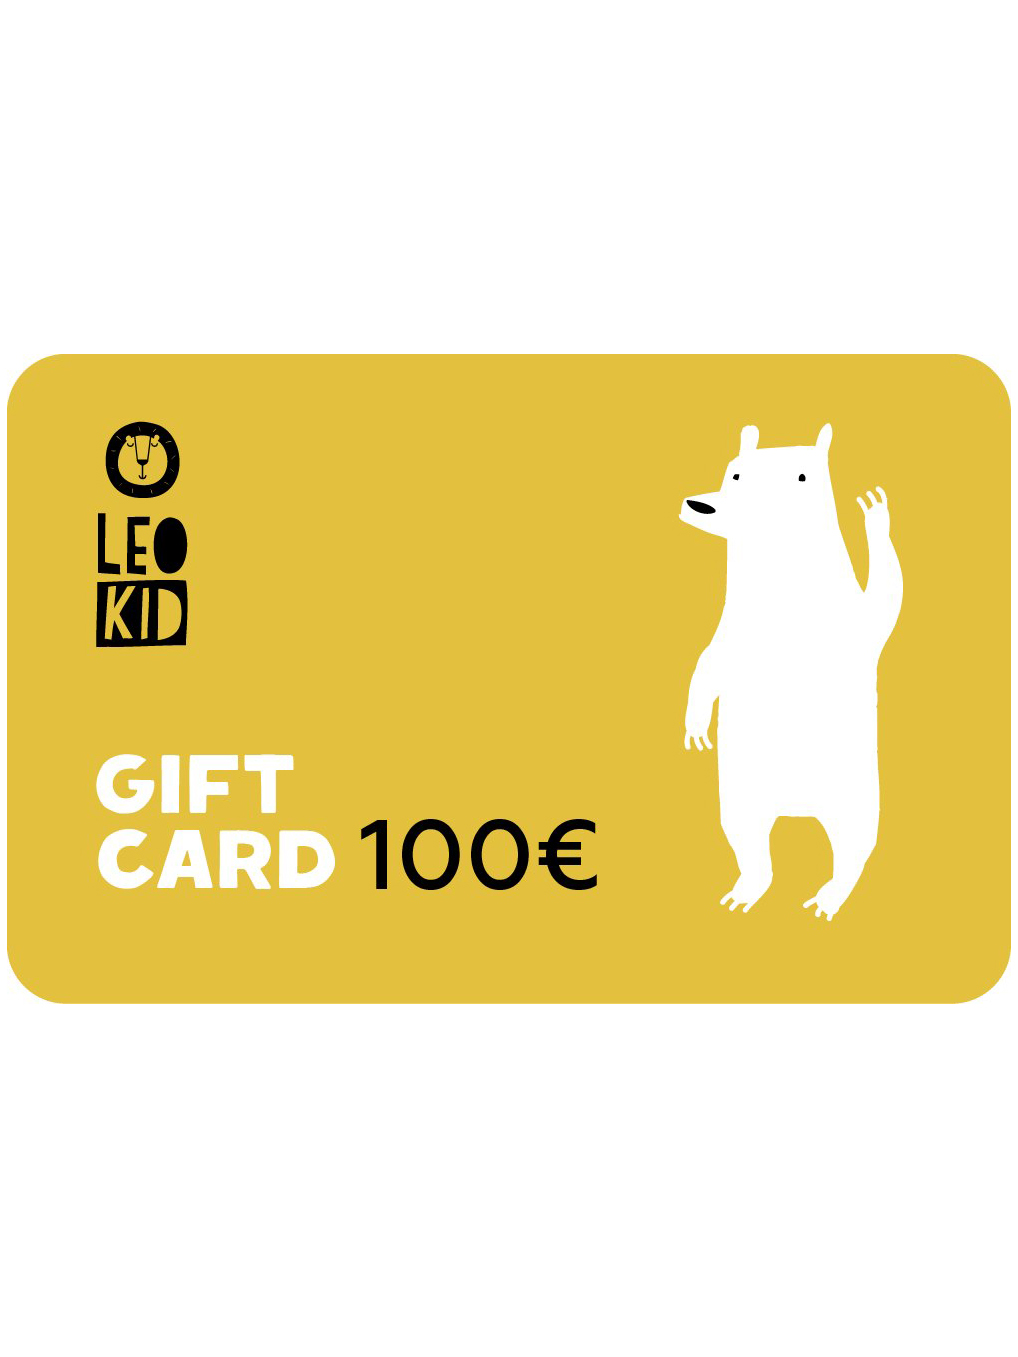 Electronic gift card 100€